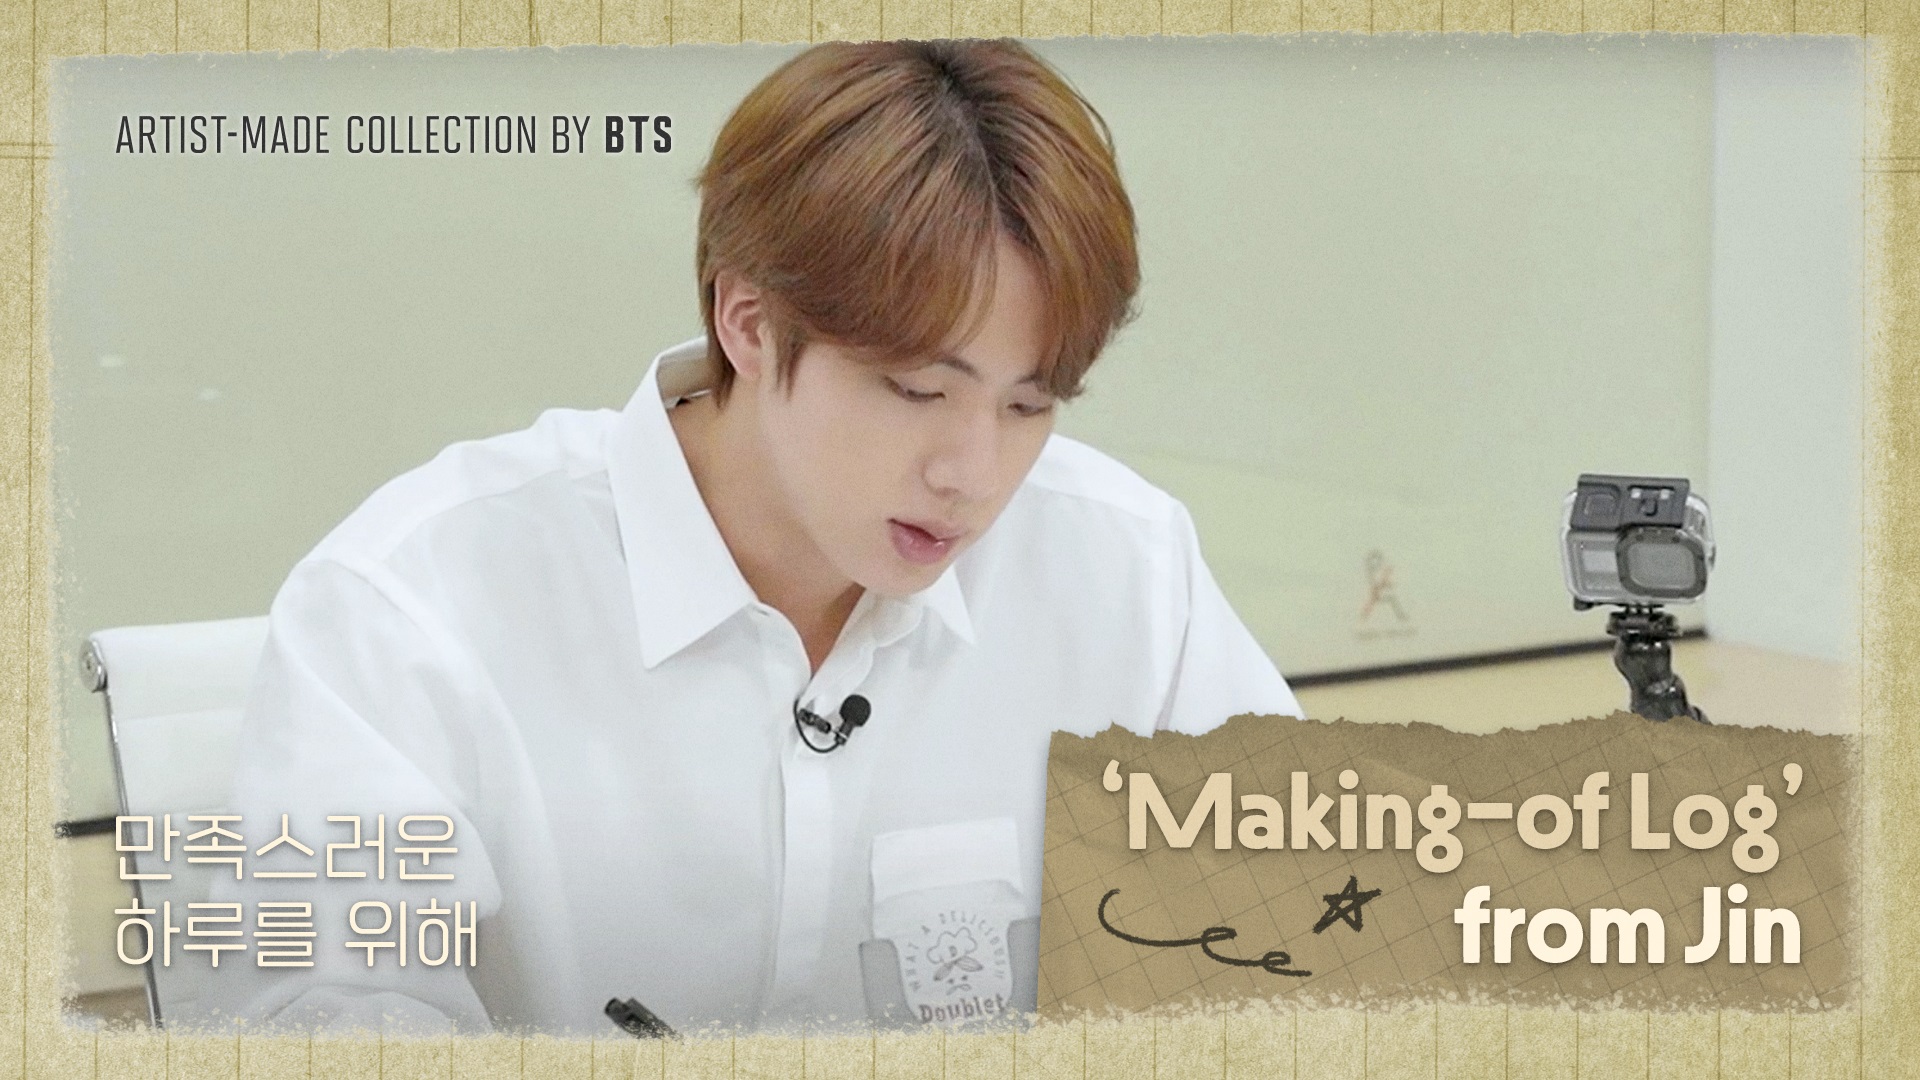 ARTIST-MADE COLLECTION BY BTS Jin